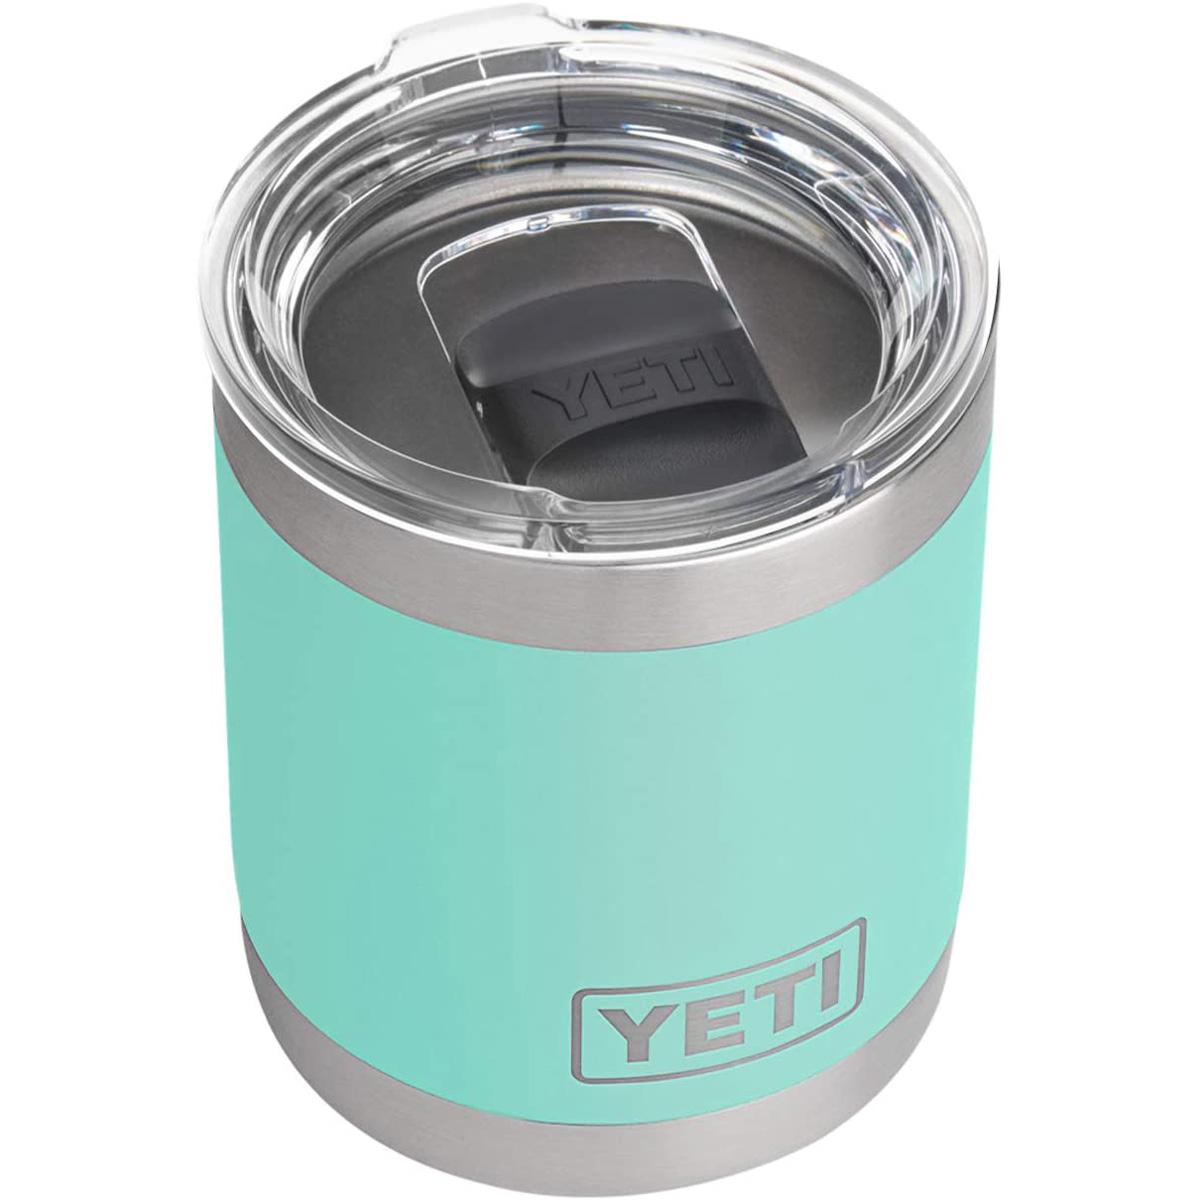 YETI Rambler Vacuum Insulated Stainless Steel Lowball for $15